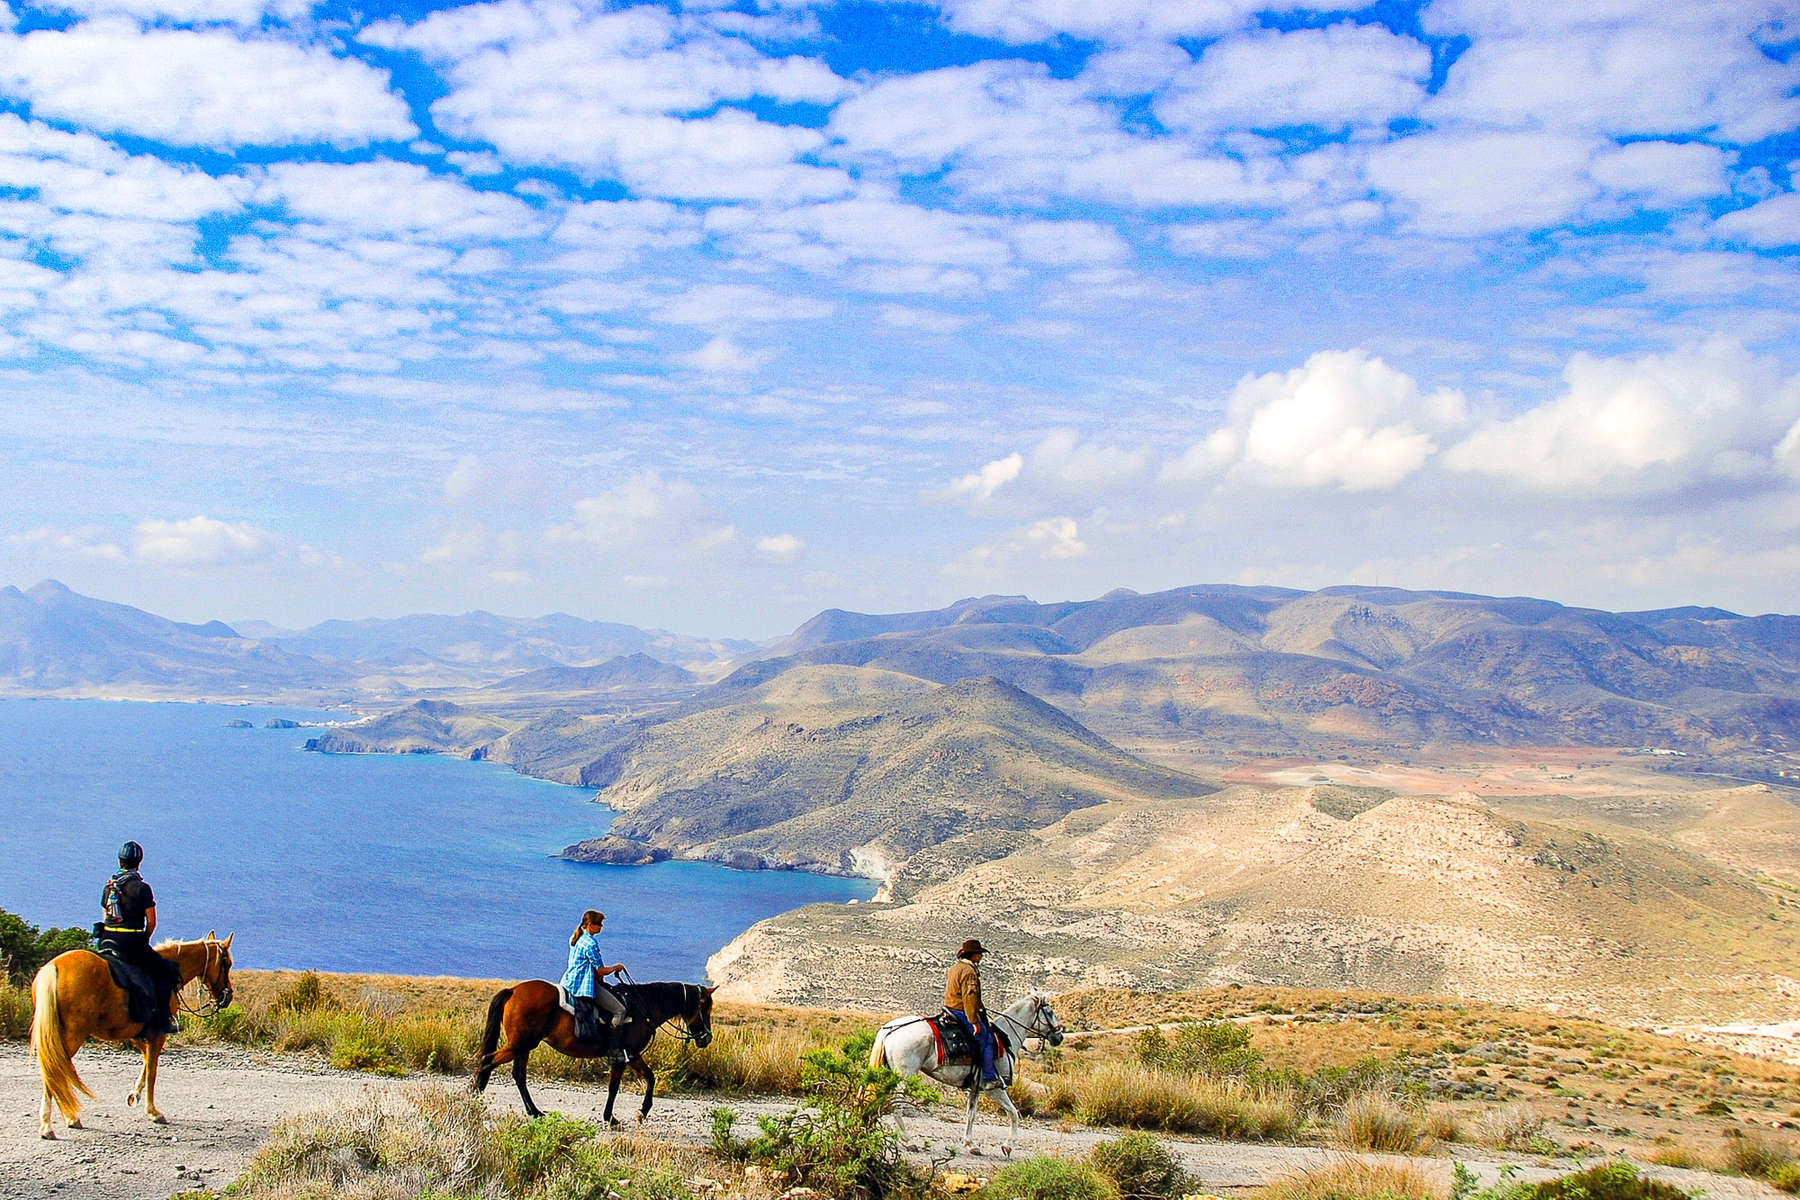 Riders enjoying a scenic trail ride in Southern Spain